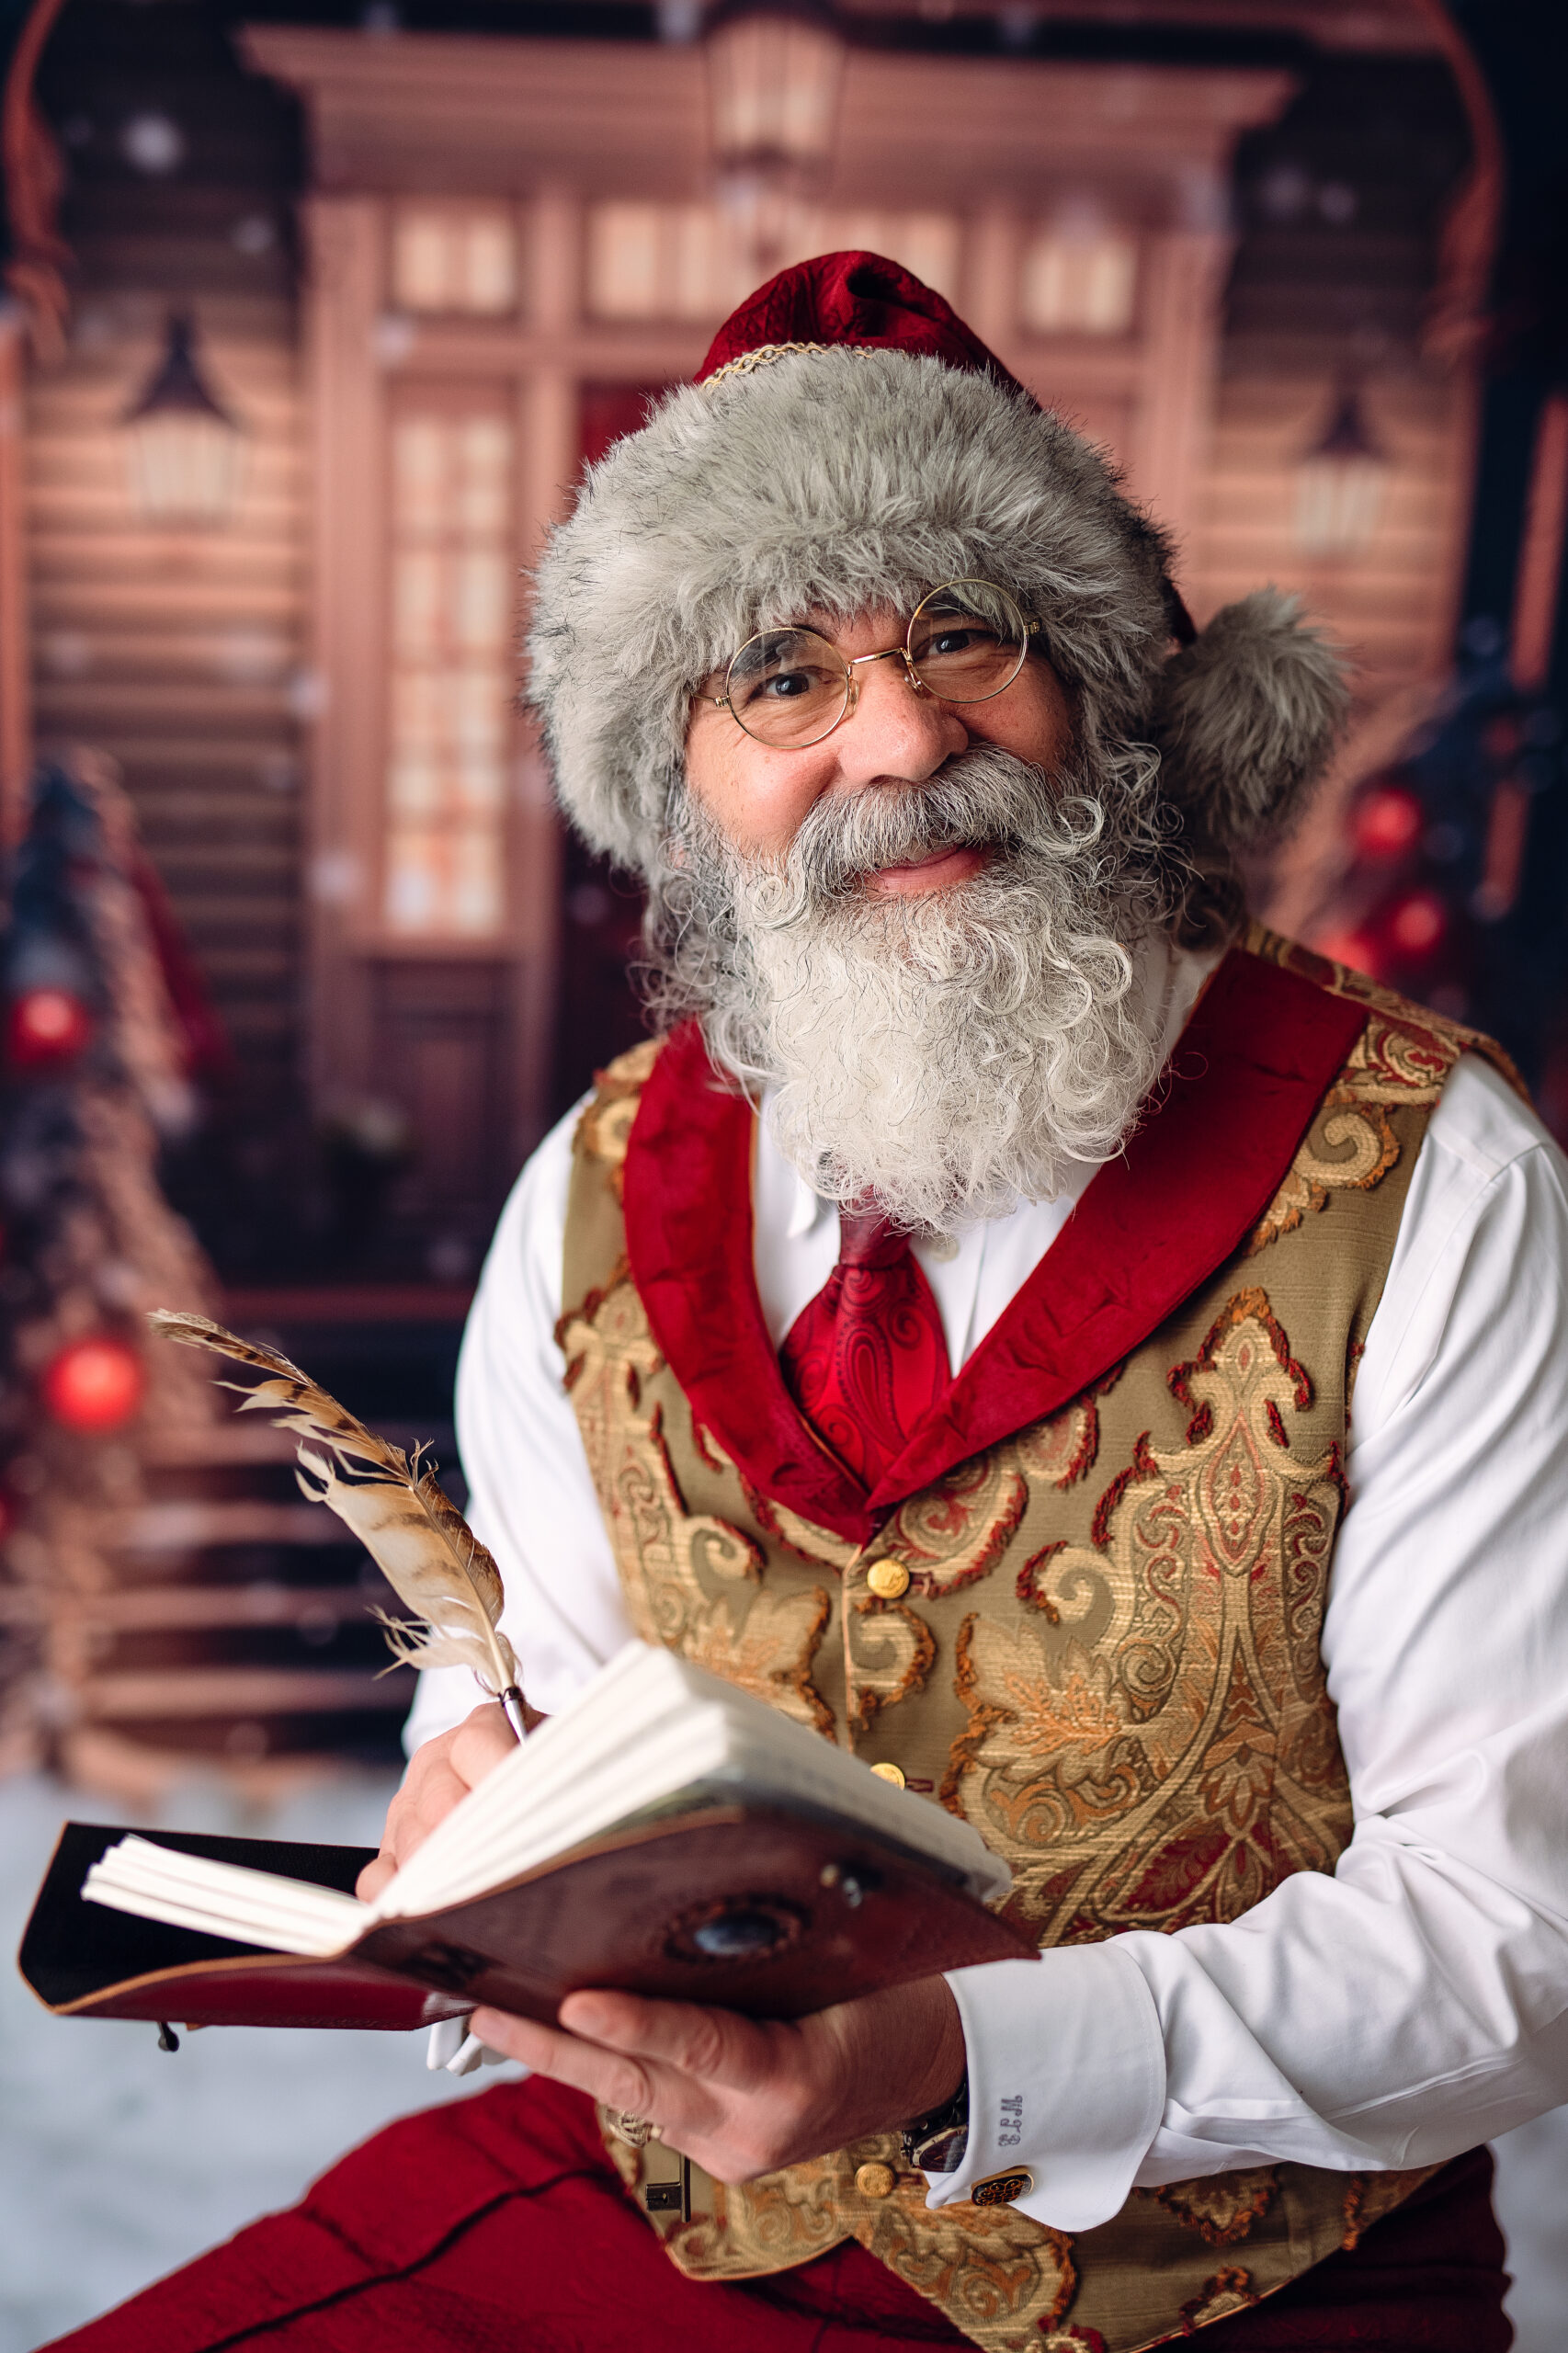 SANTA SMILING WITH HIS NICE LIST